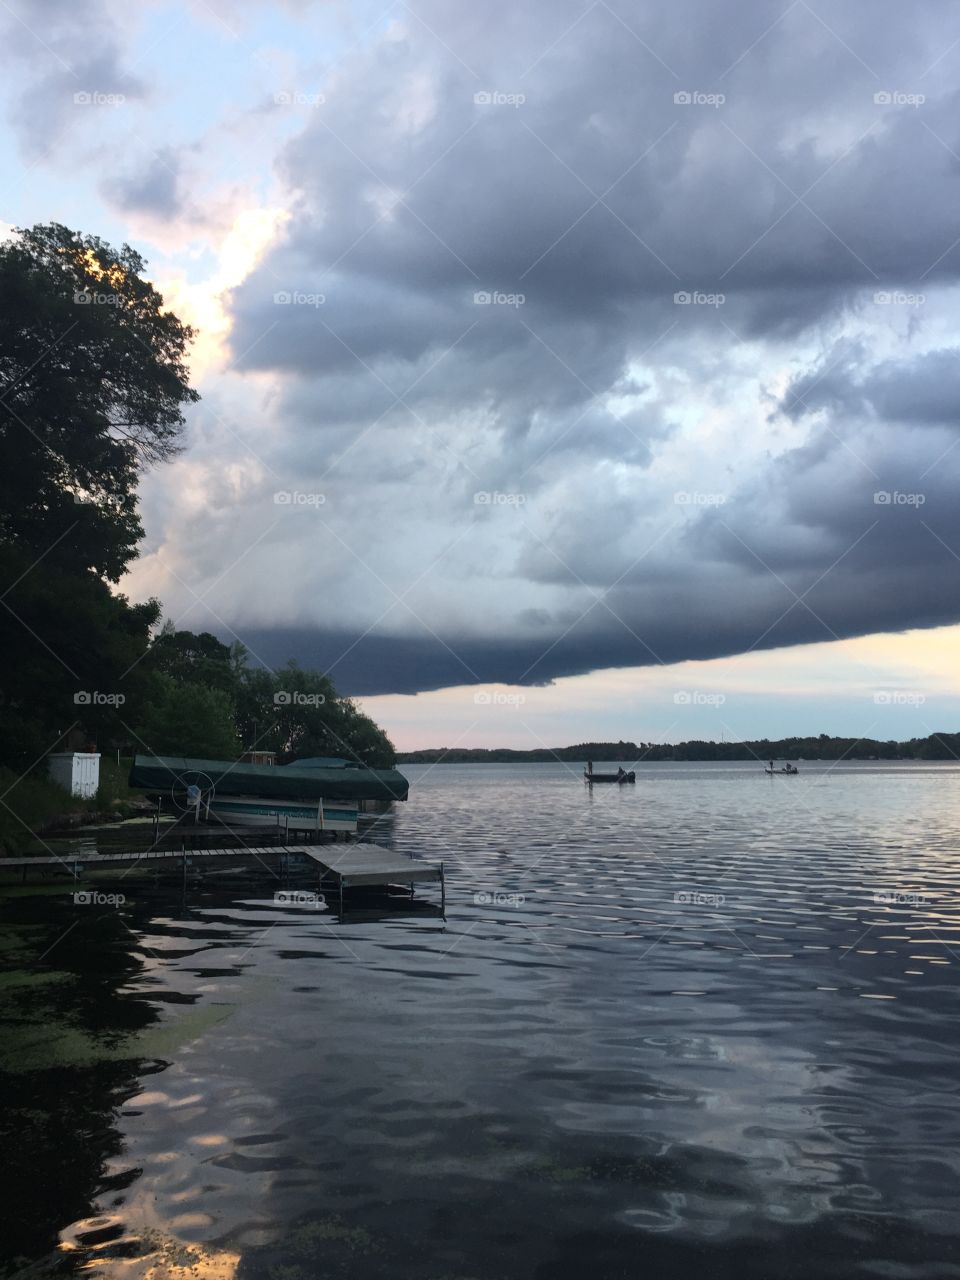 A looming storm cloud splits the sky over the lake. A few straggling boats hurrying back to shore before the storm hits.